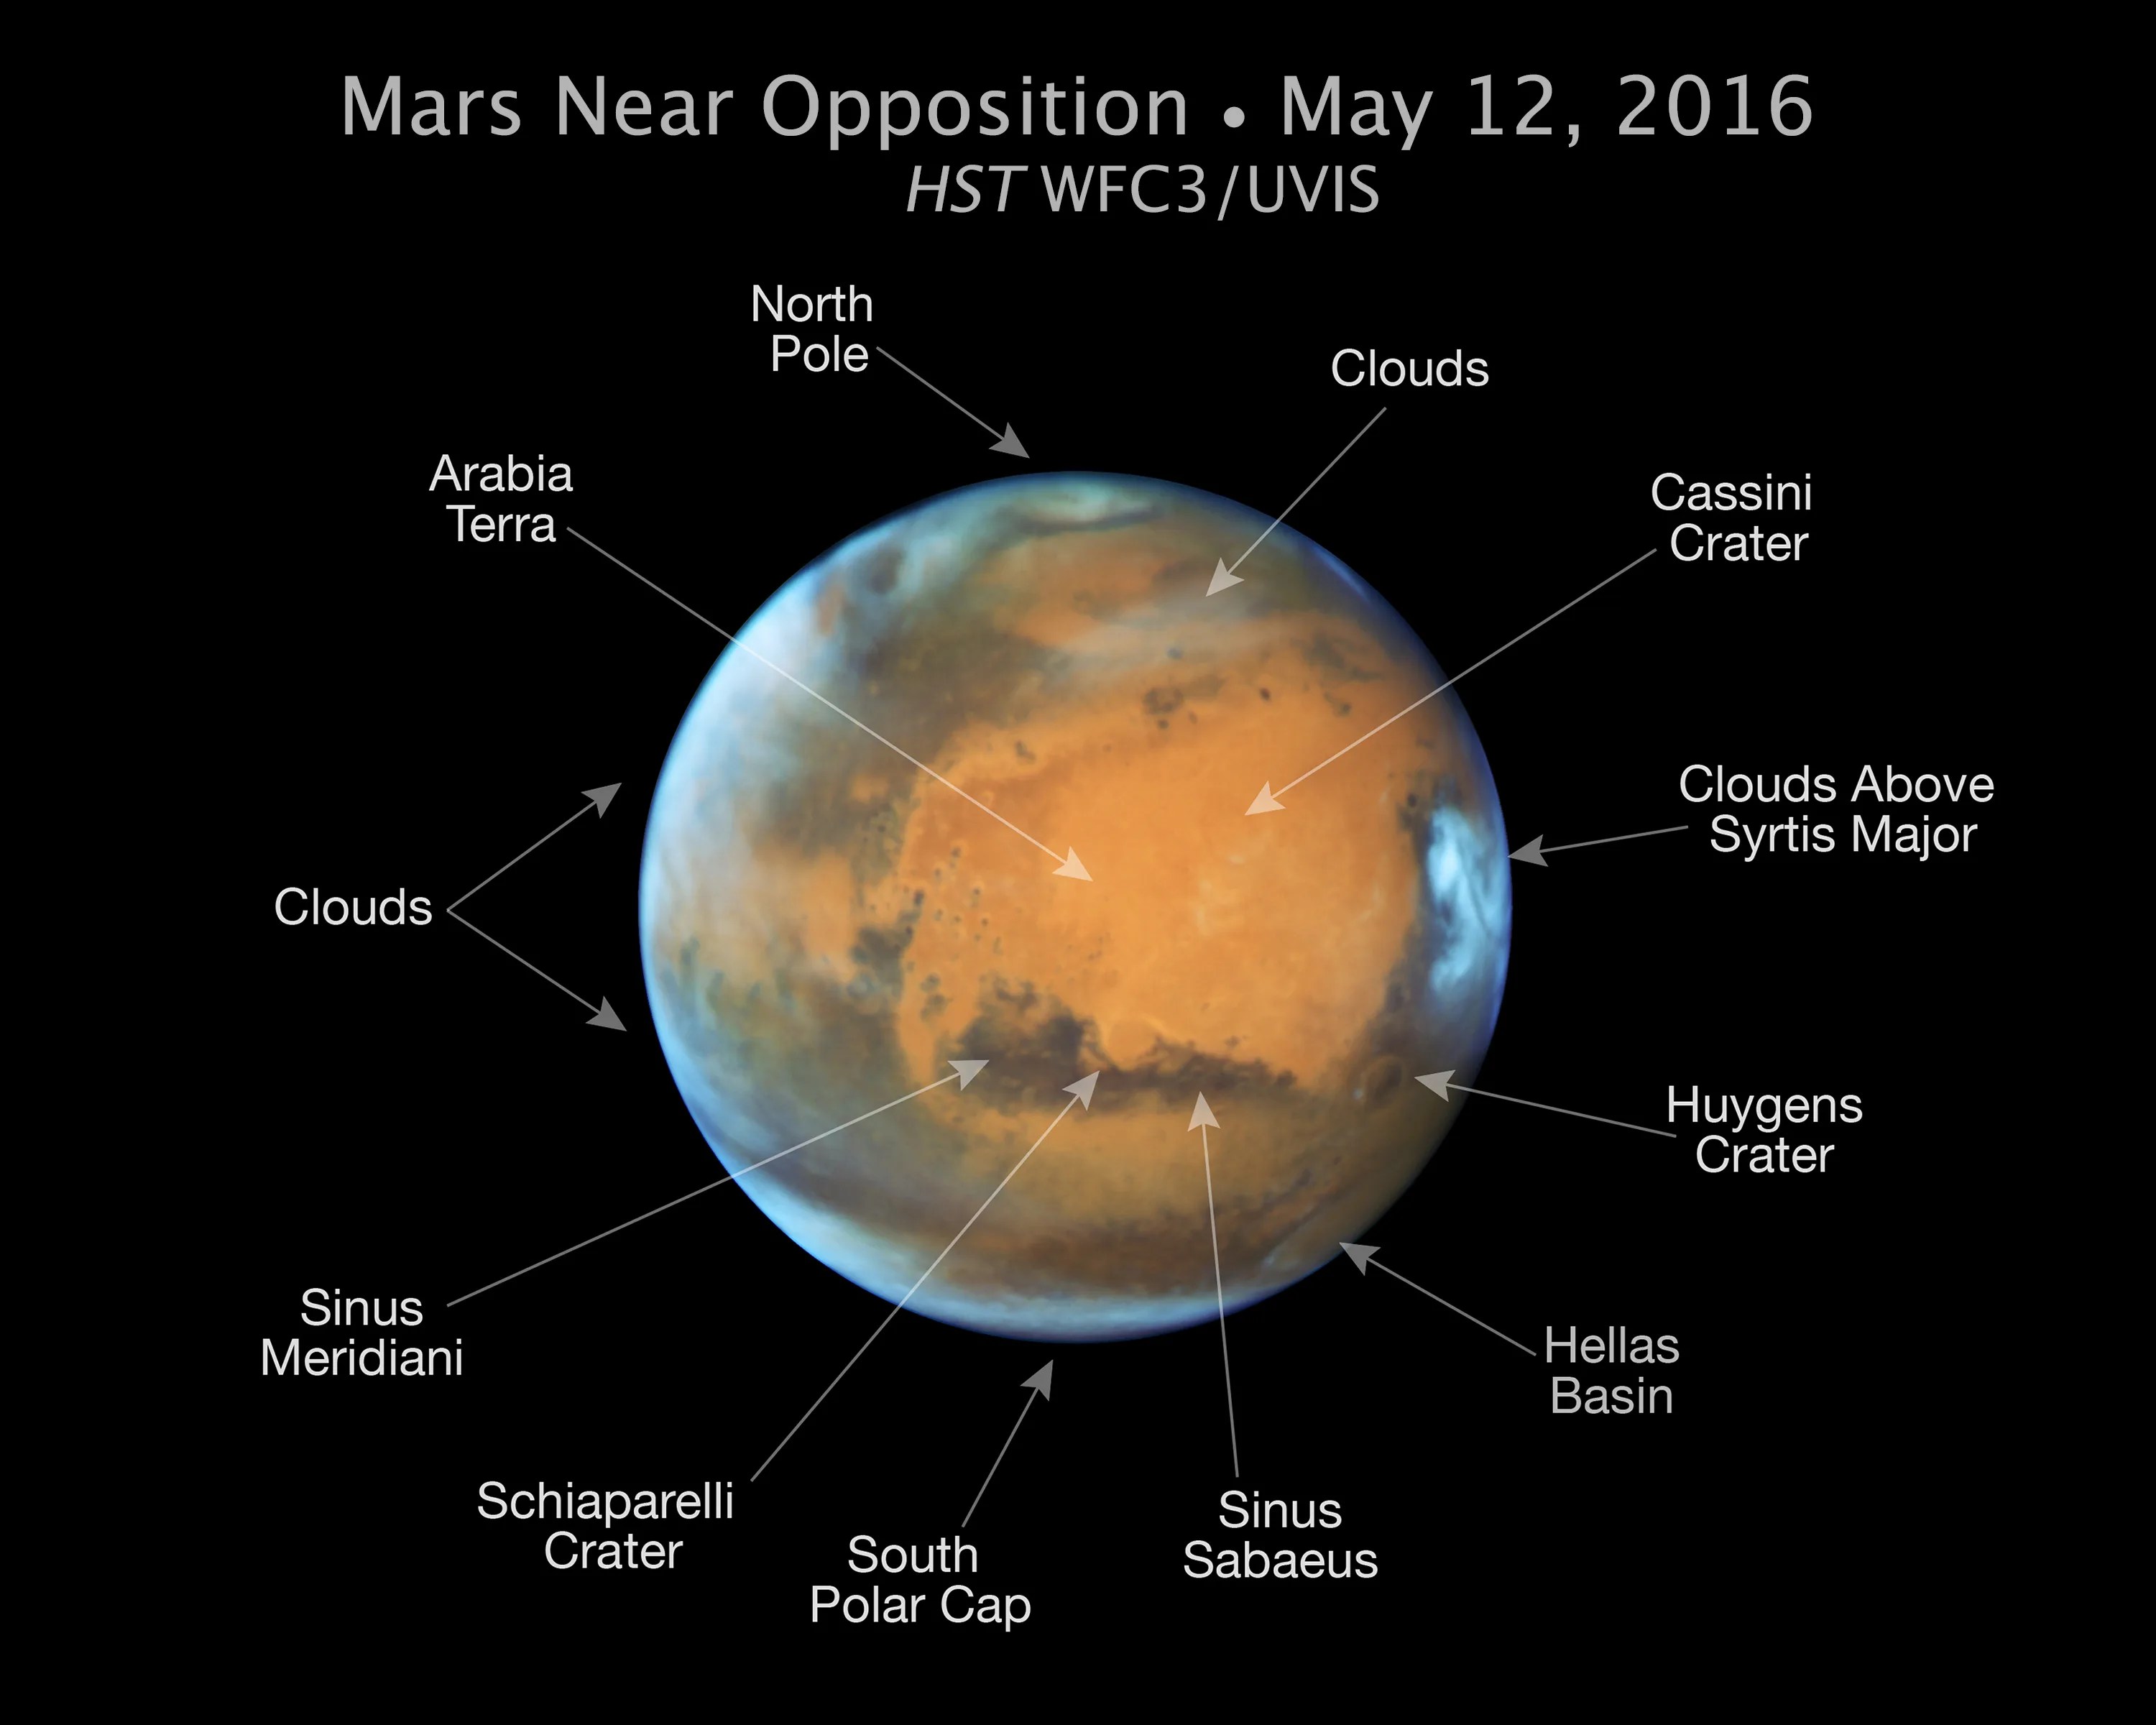 Mars image with major features (clouds, ice caps, poles, craters) indicated